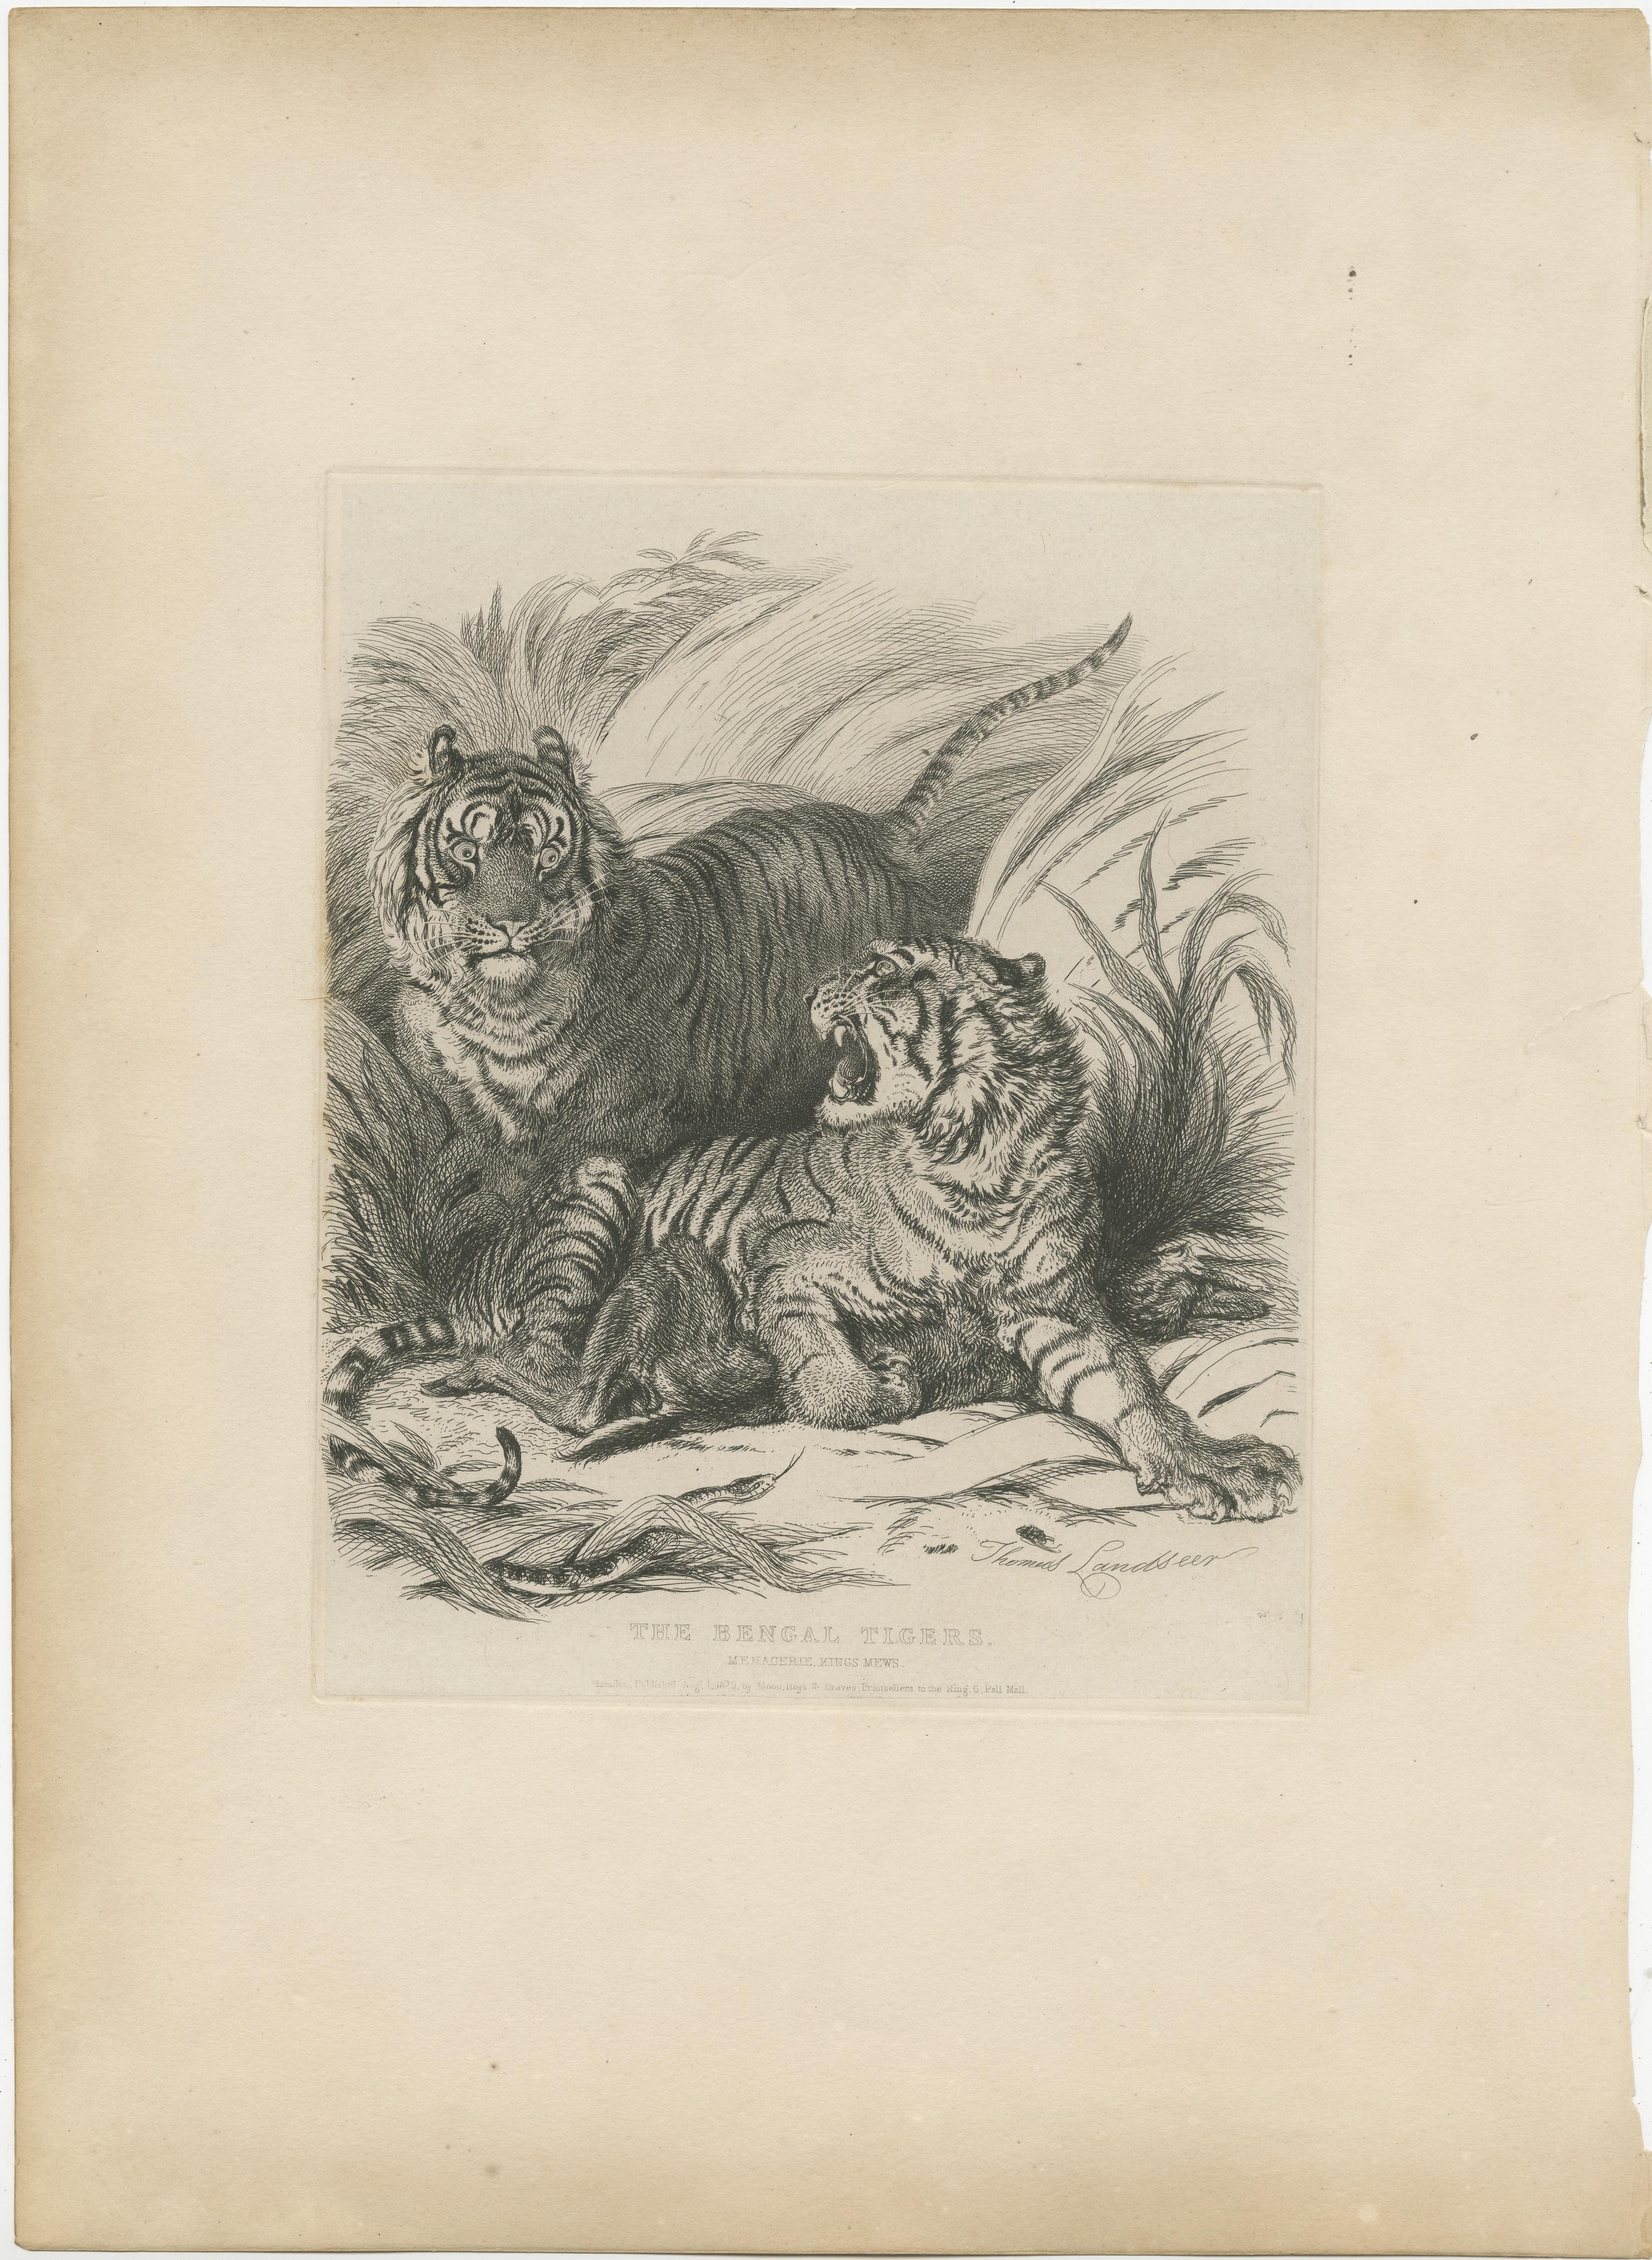 Antique print titled 'The Bengal Tigers'. Original old print of Bengal tigers. This print originates from the series 'characteristic sketches of animals, principally from the zoological gardens, Regent's Park' published circa 1832 by John Henry